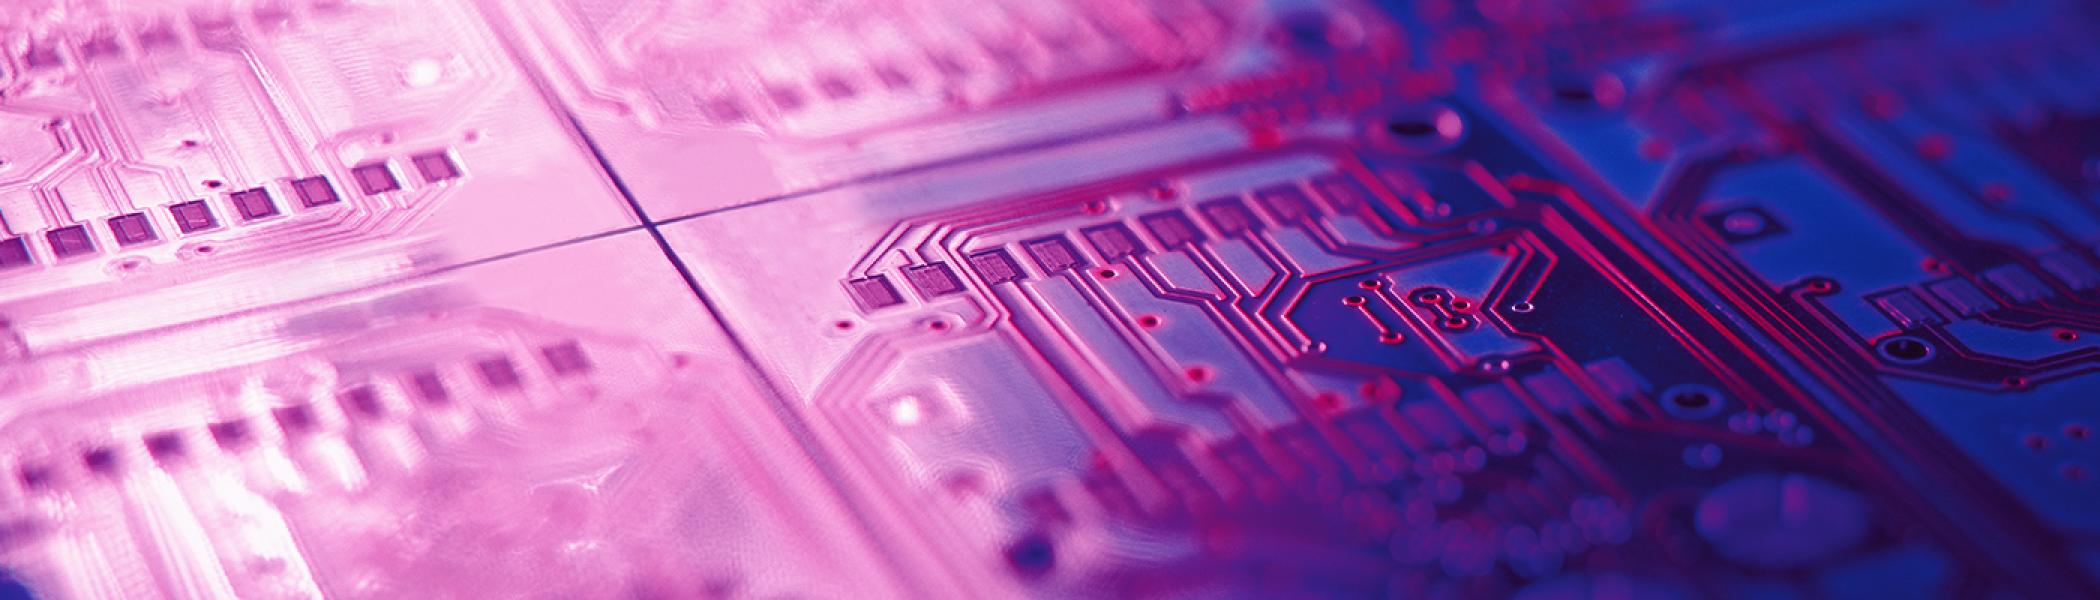 Close-up view of a circuit board